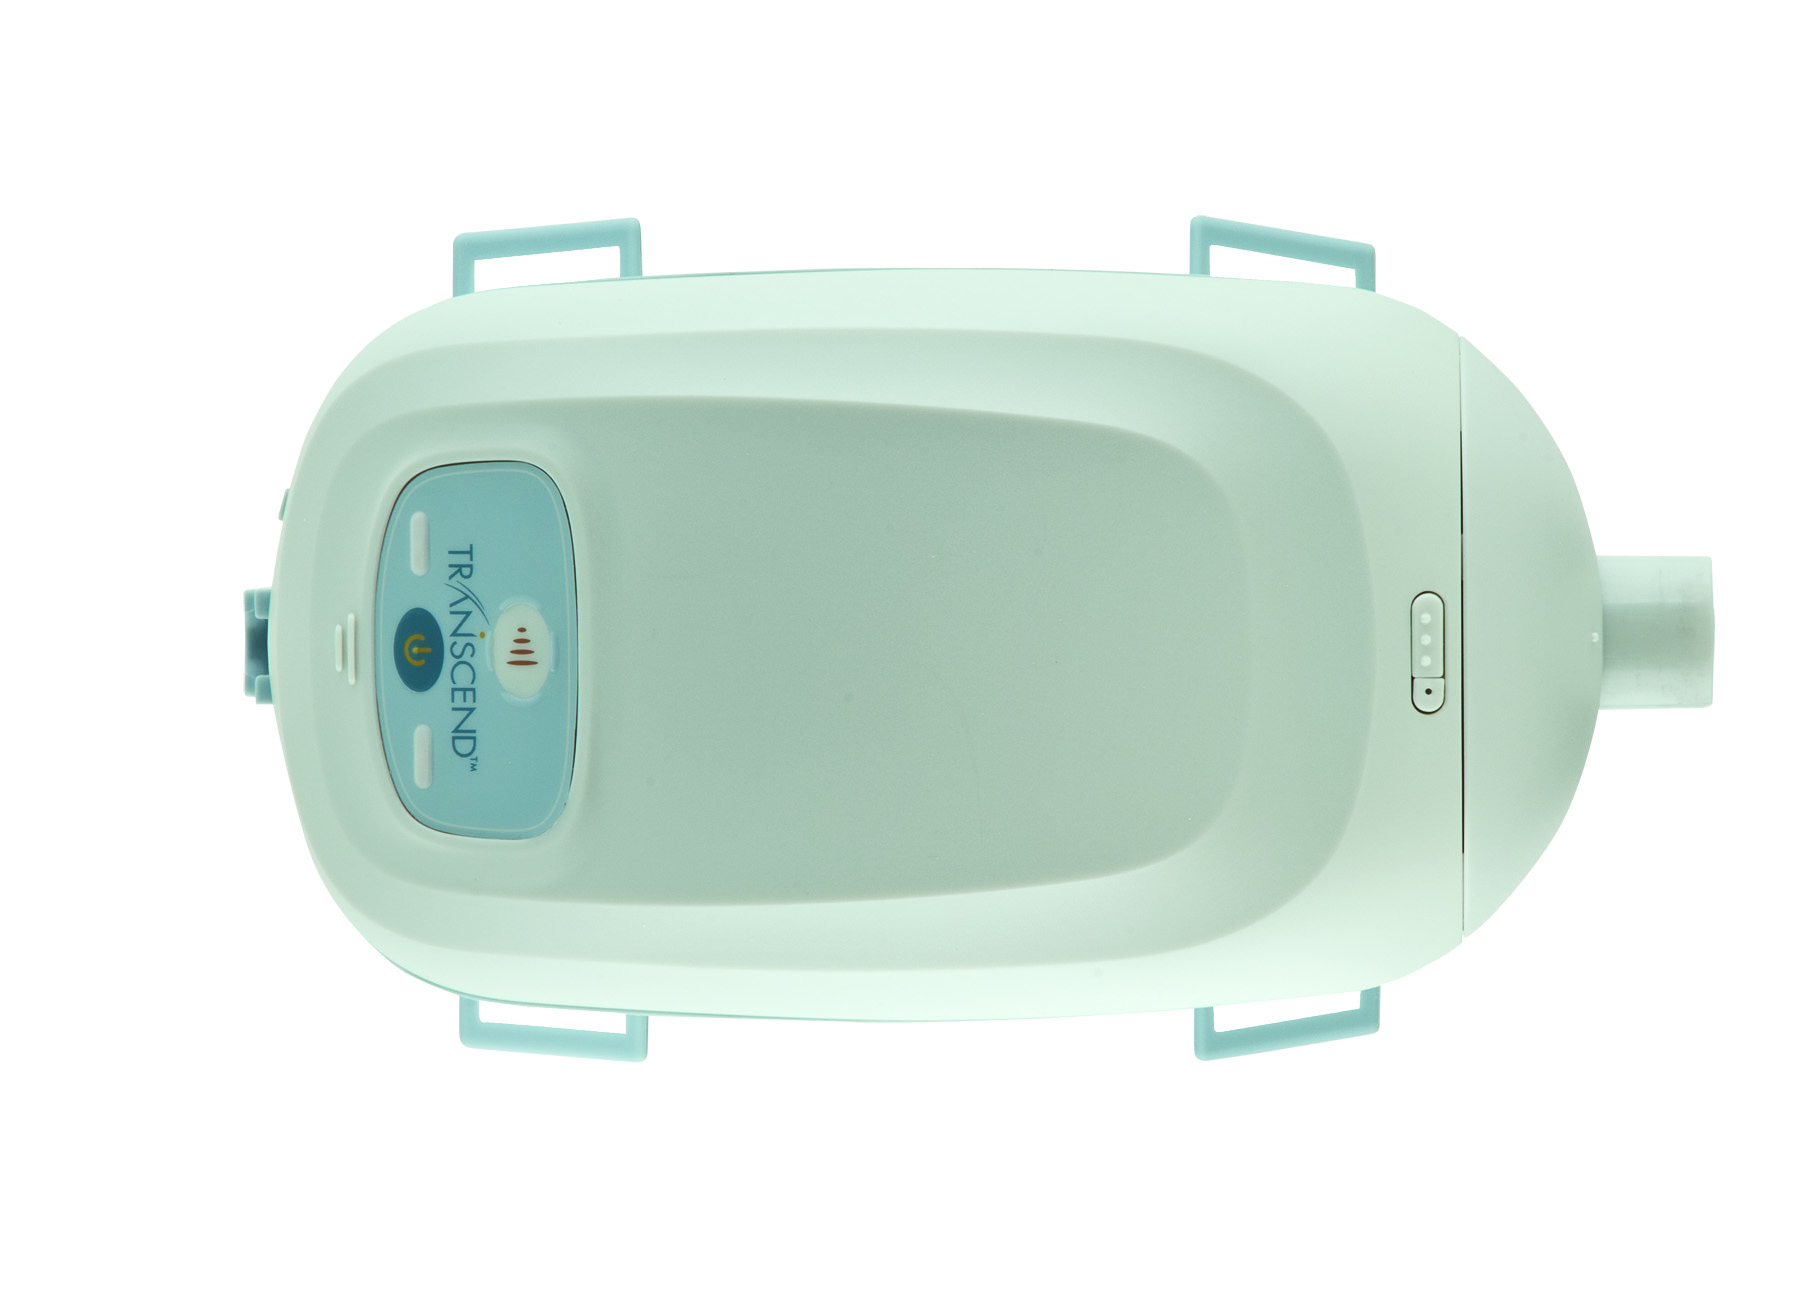 Transcend Sleep Therapy CPAP